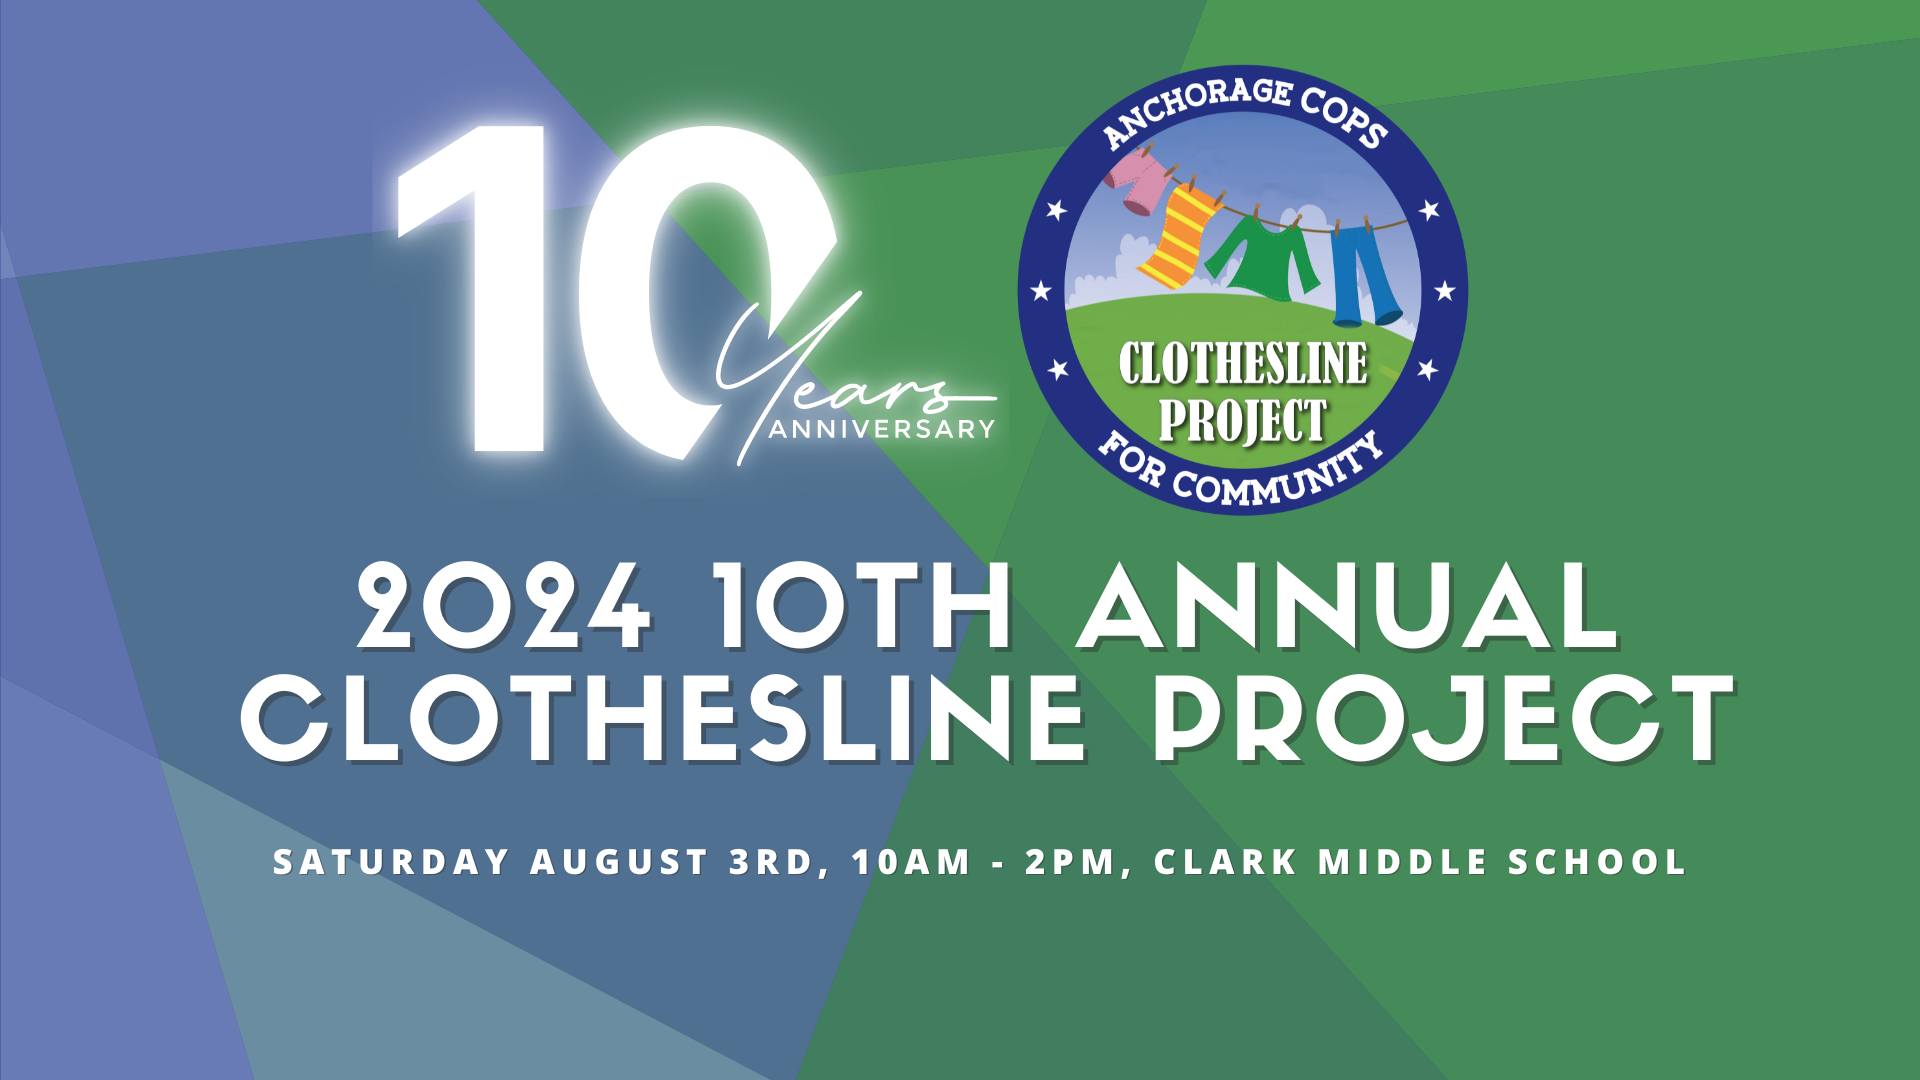 Green and Blue graphic with geometric pattern background and logo of Anchorage Cops for Community Clothesline Project. 10 years Anniversary. 2024 10th Annual Clothesline Project. SATURDAY AUGUST 3RD, 10AM - 2PM, CLARK MIDDLE SCHOOL